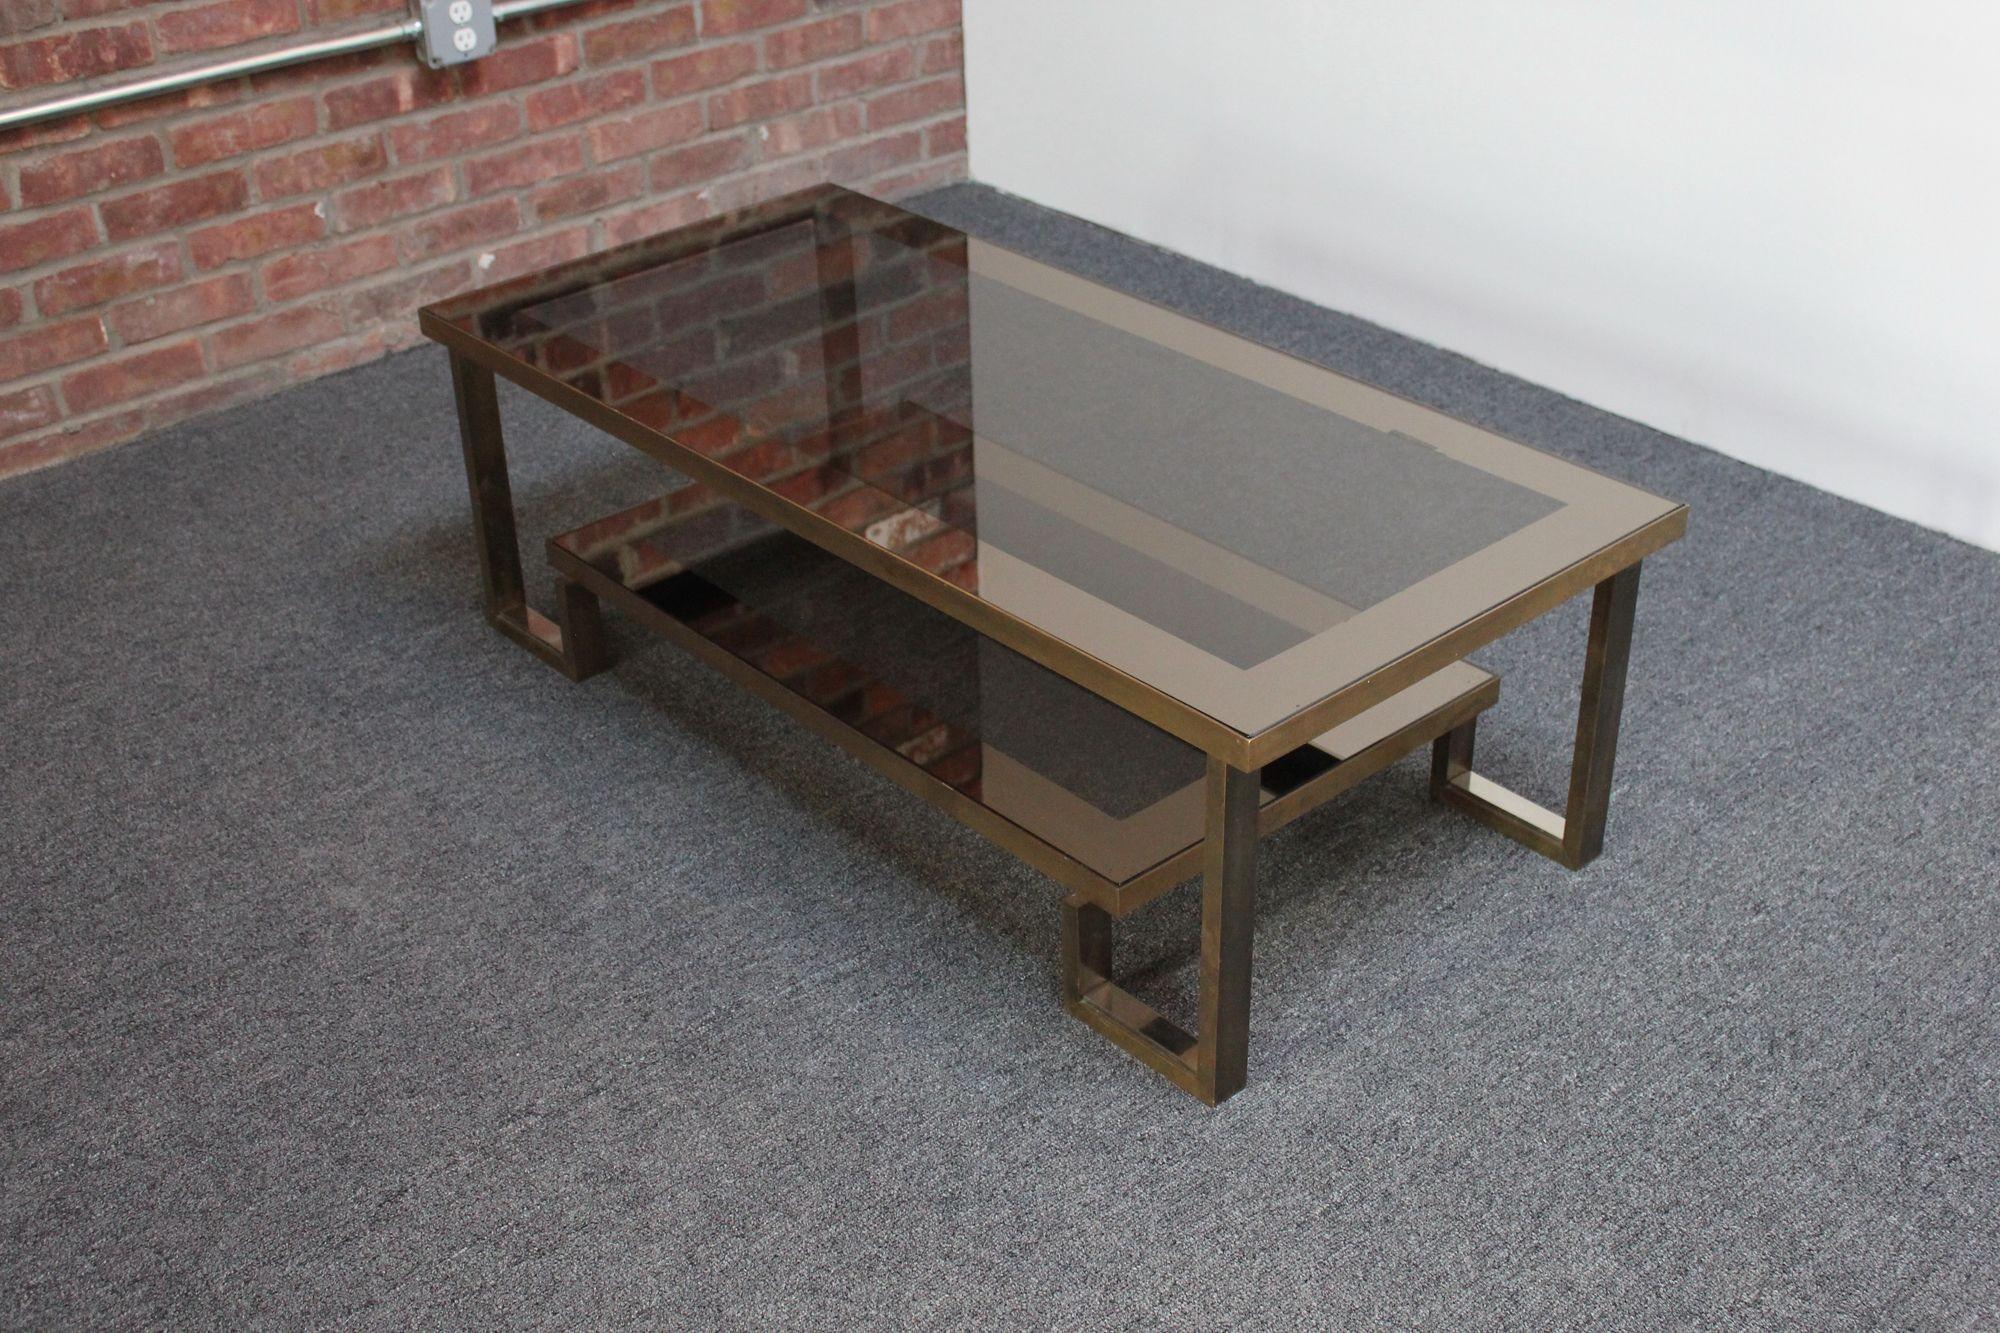 Luxurious, low Maison Jansen coffee table with bronze edging and smoked mirror glass surfaces (ca. 1960s, France).
Beautifully aged/all-original condition with patina to the bronze and mirror along with glass scuffs to the glass consistent with age